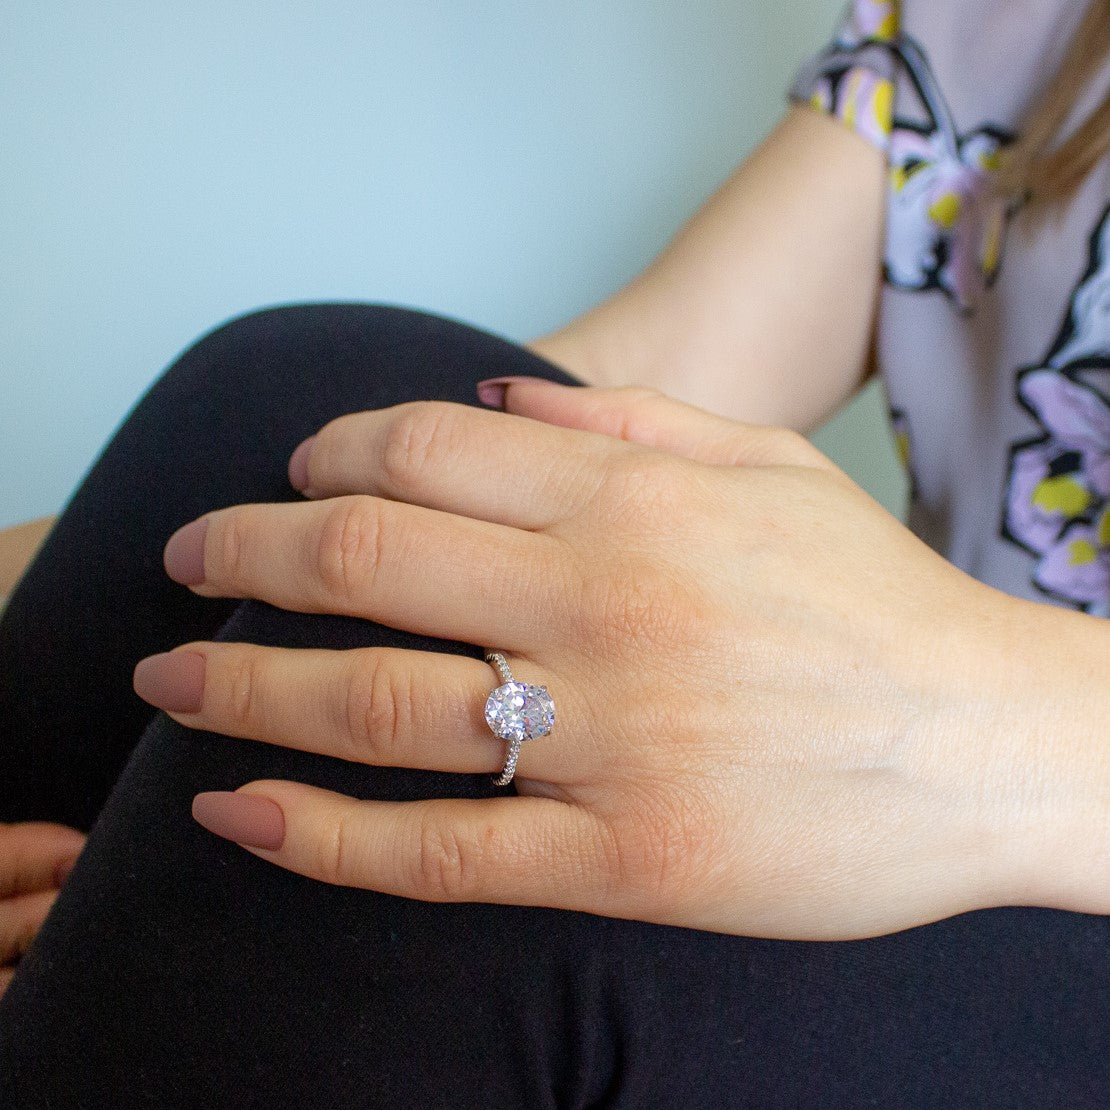 lifestyle photo of oval ring, showing a woman with the ring on her finger and hand placed on the knee